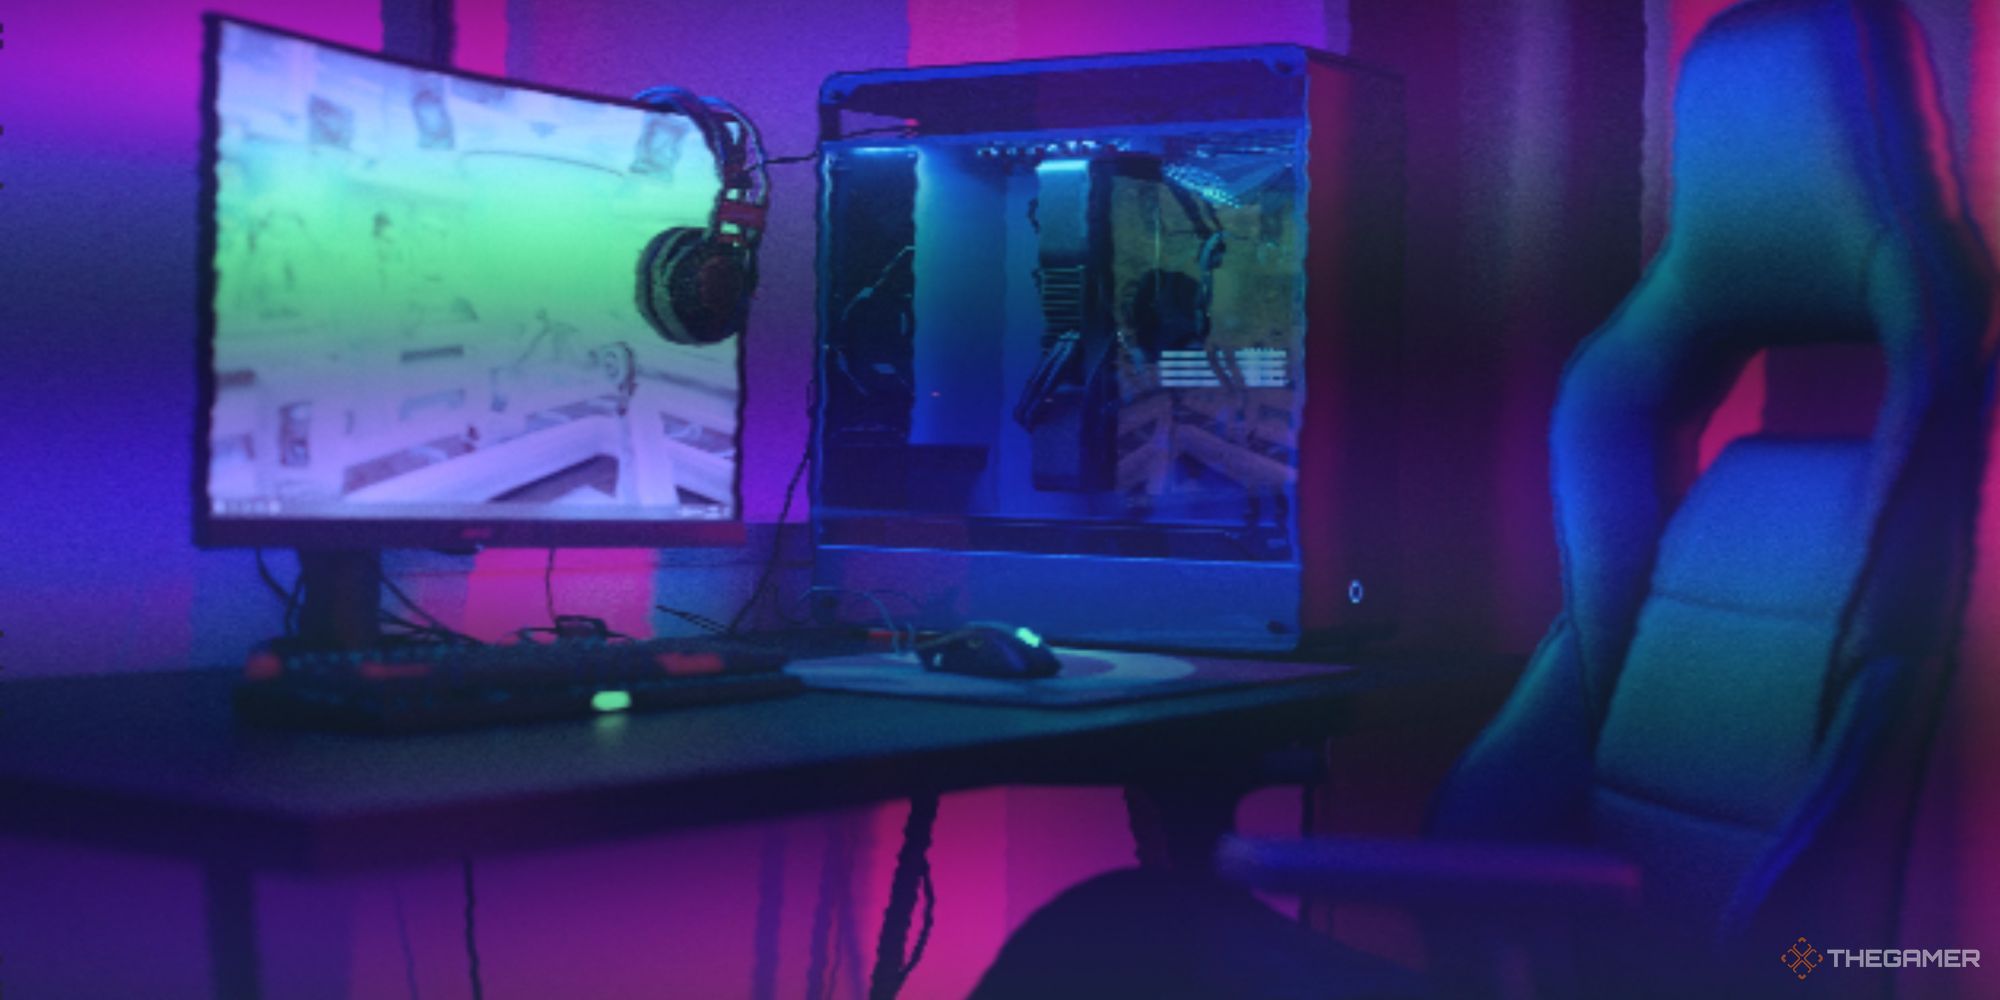 A gaming set up. The image has a blue and purple filter, and looks distorted. 